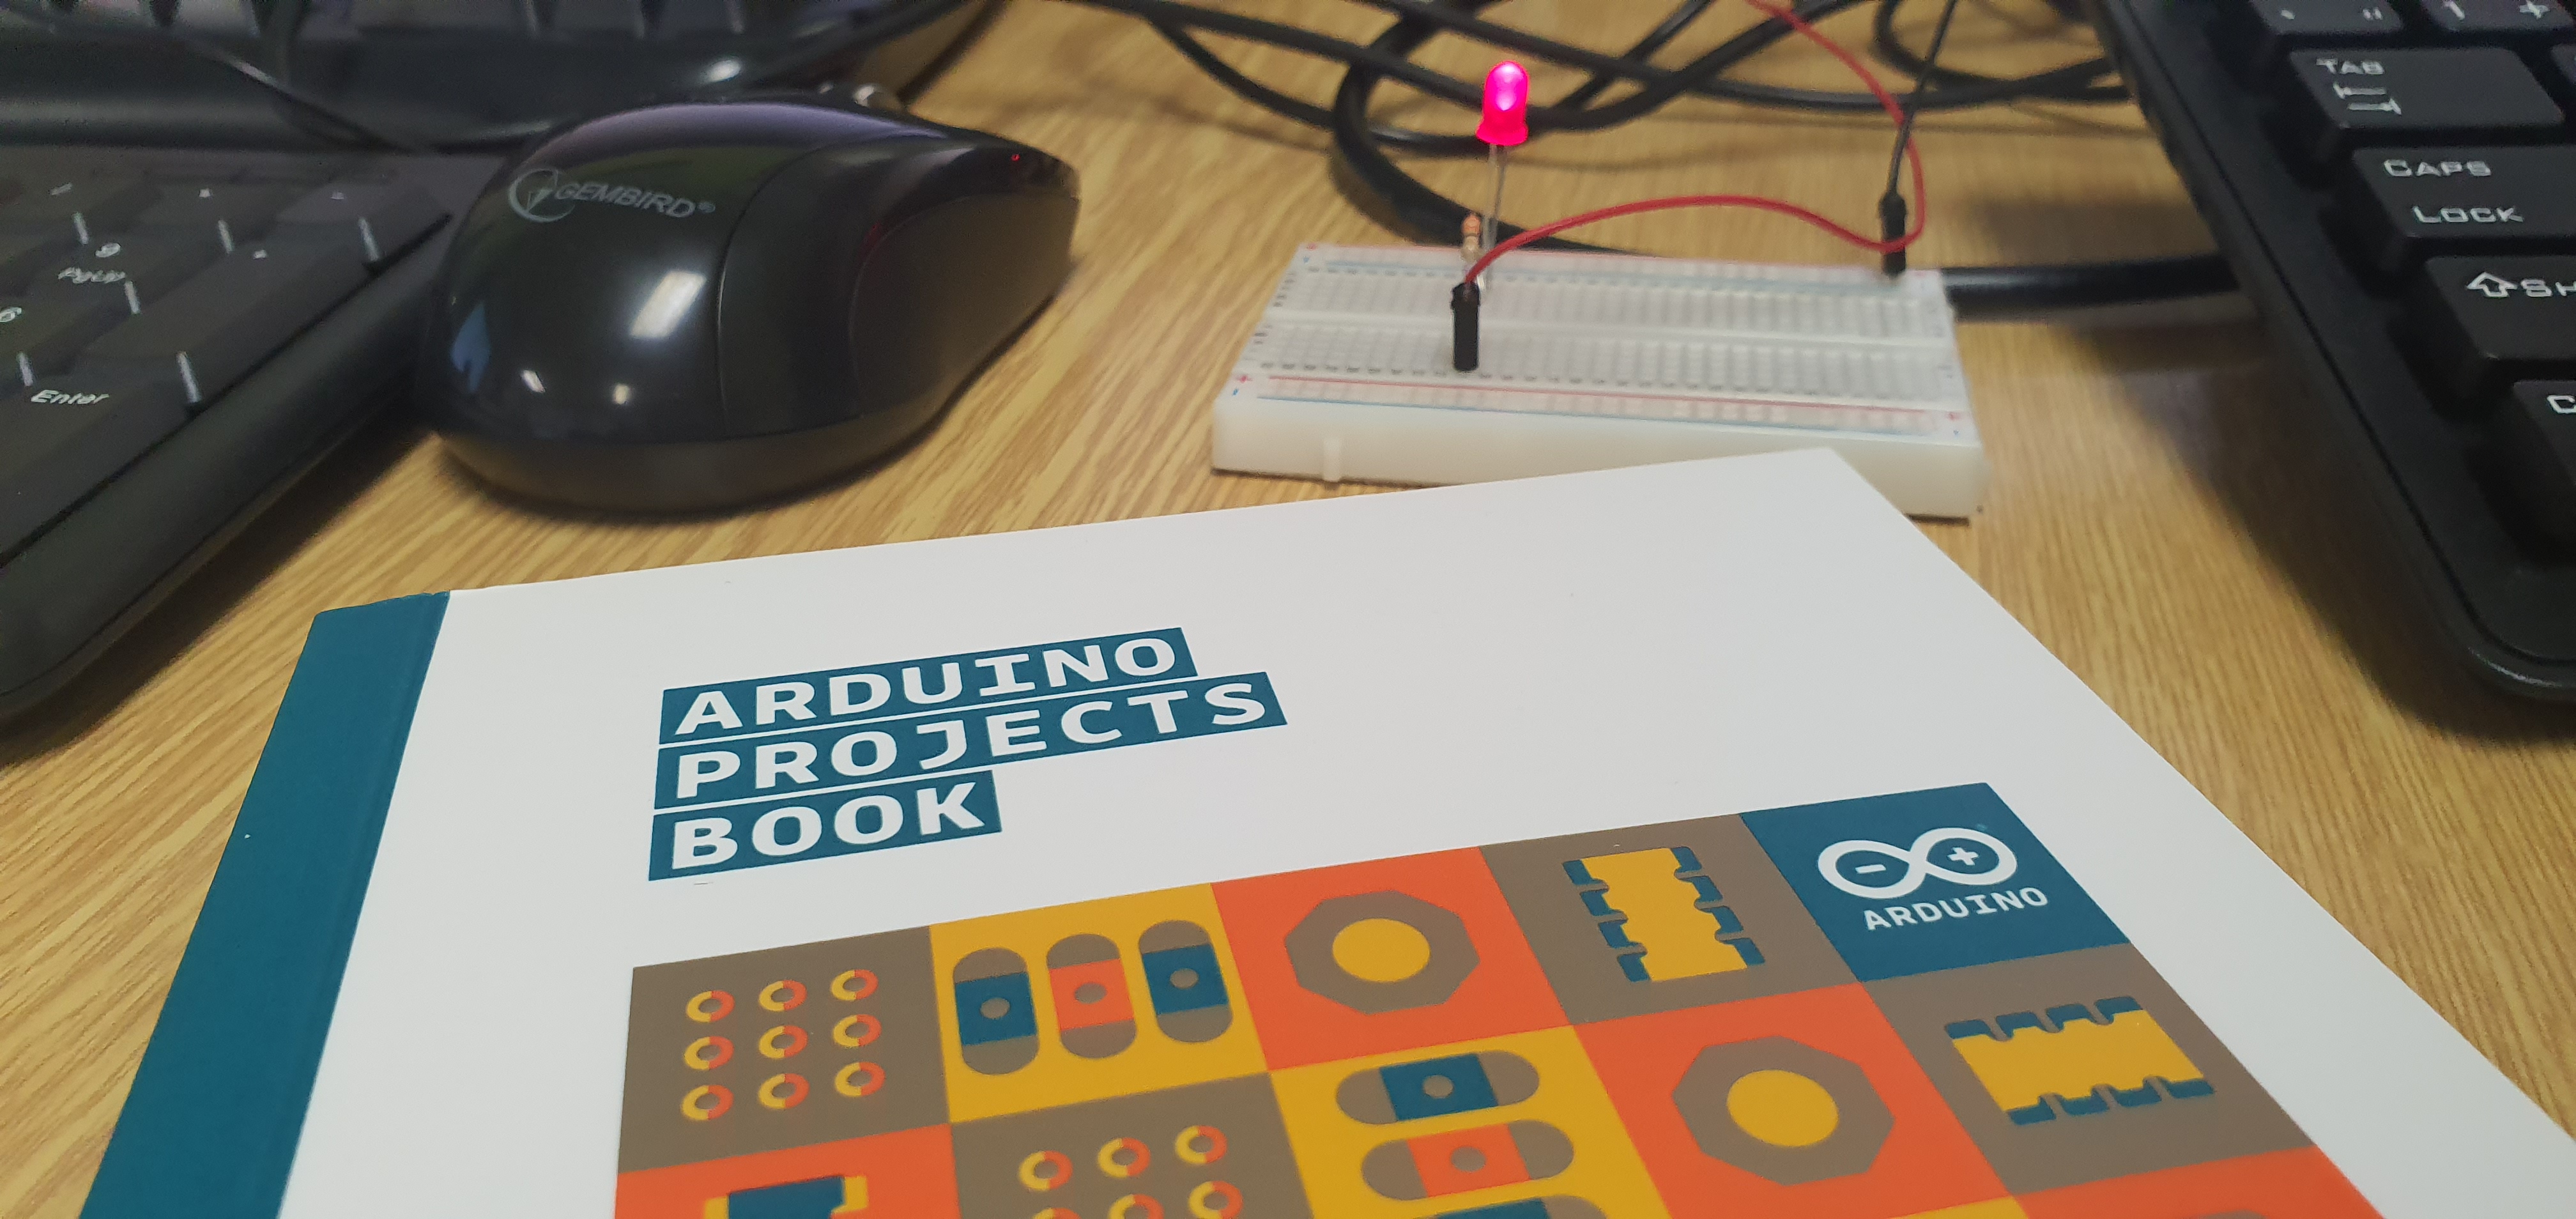 Arduino PROJECTS BOOK